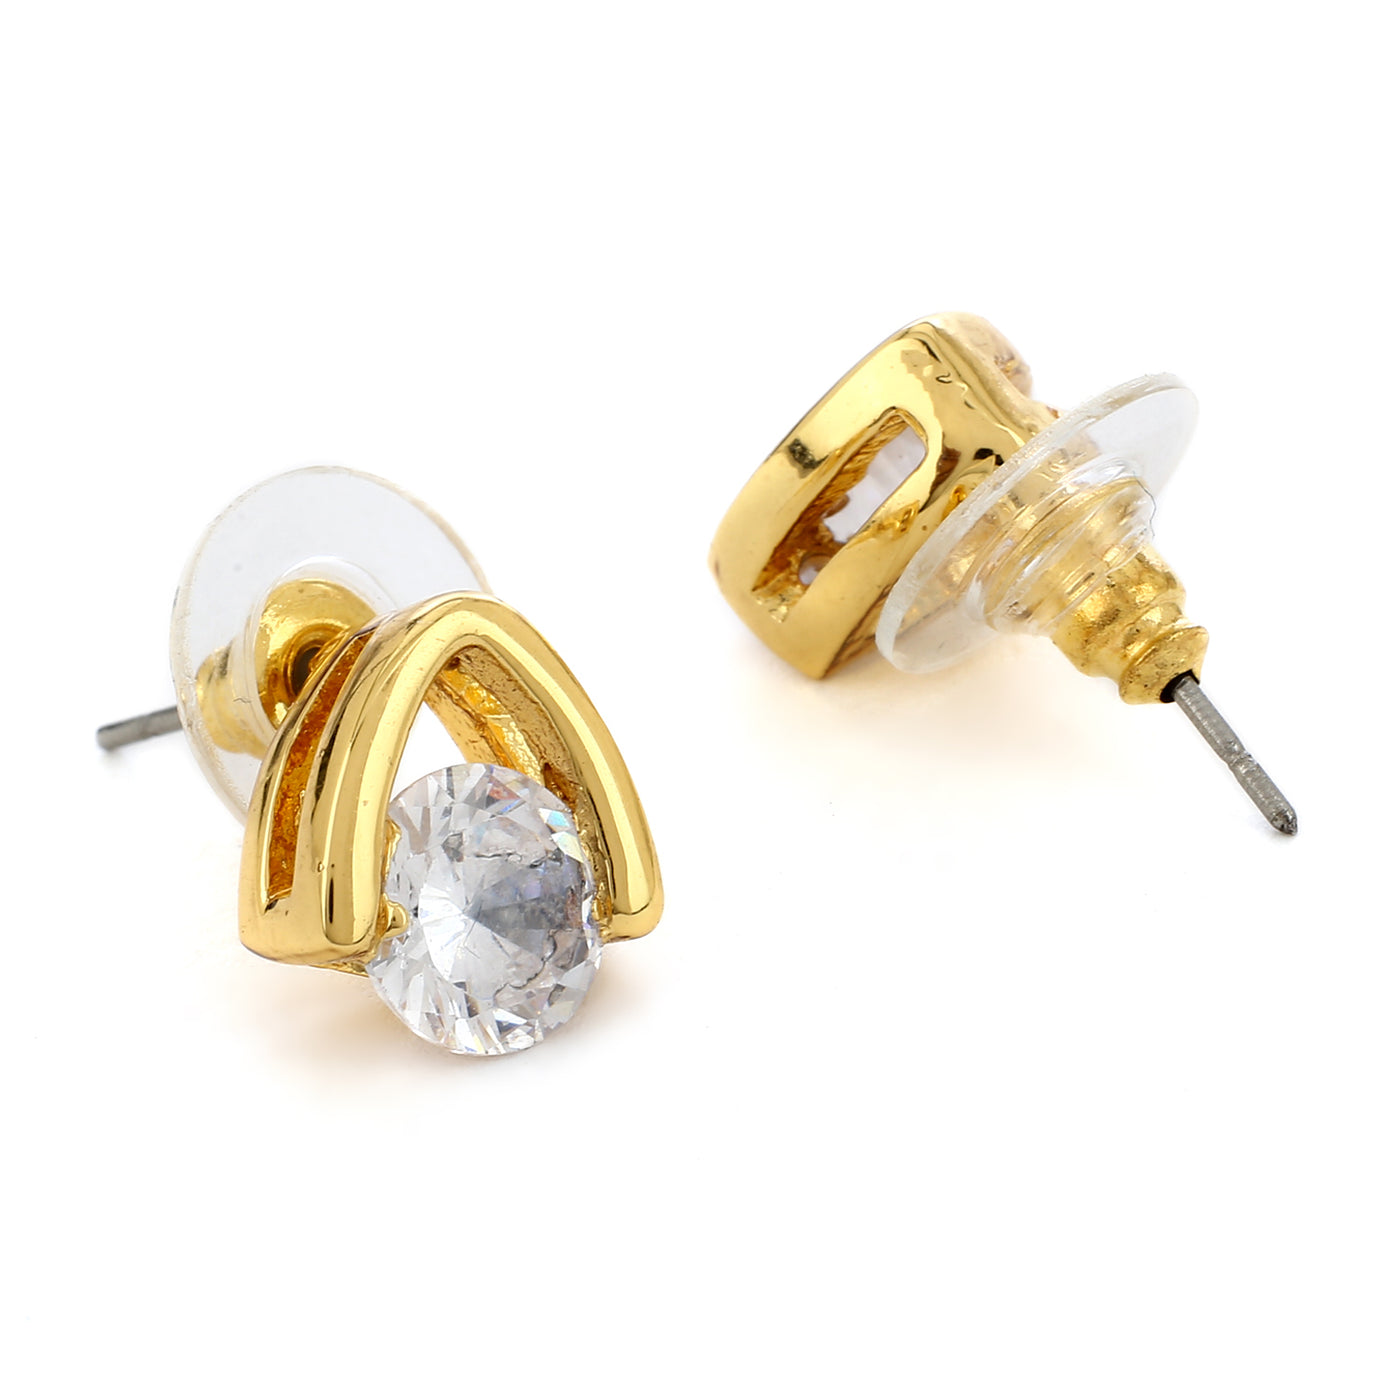 Gold Tone Plated Small Stud Earrings